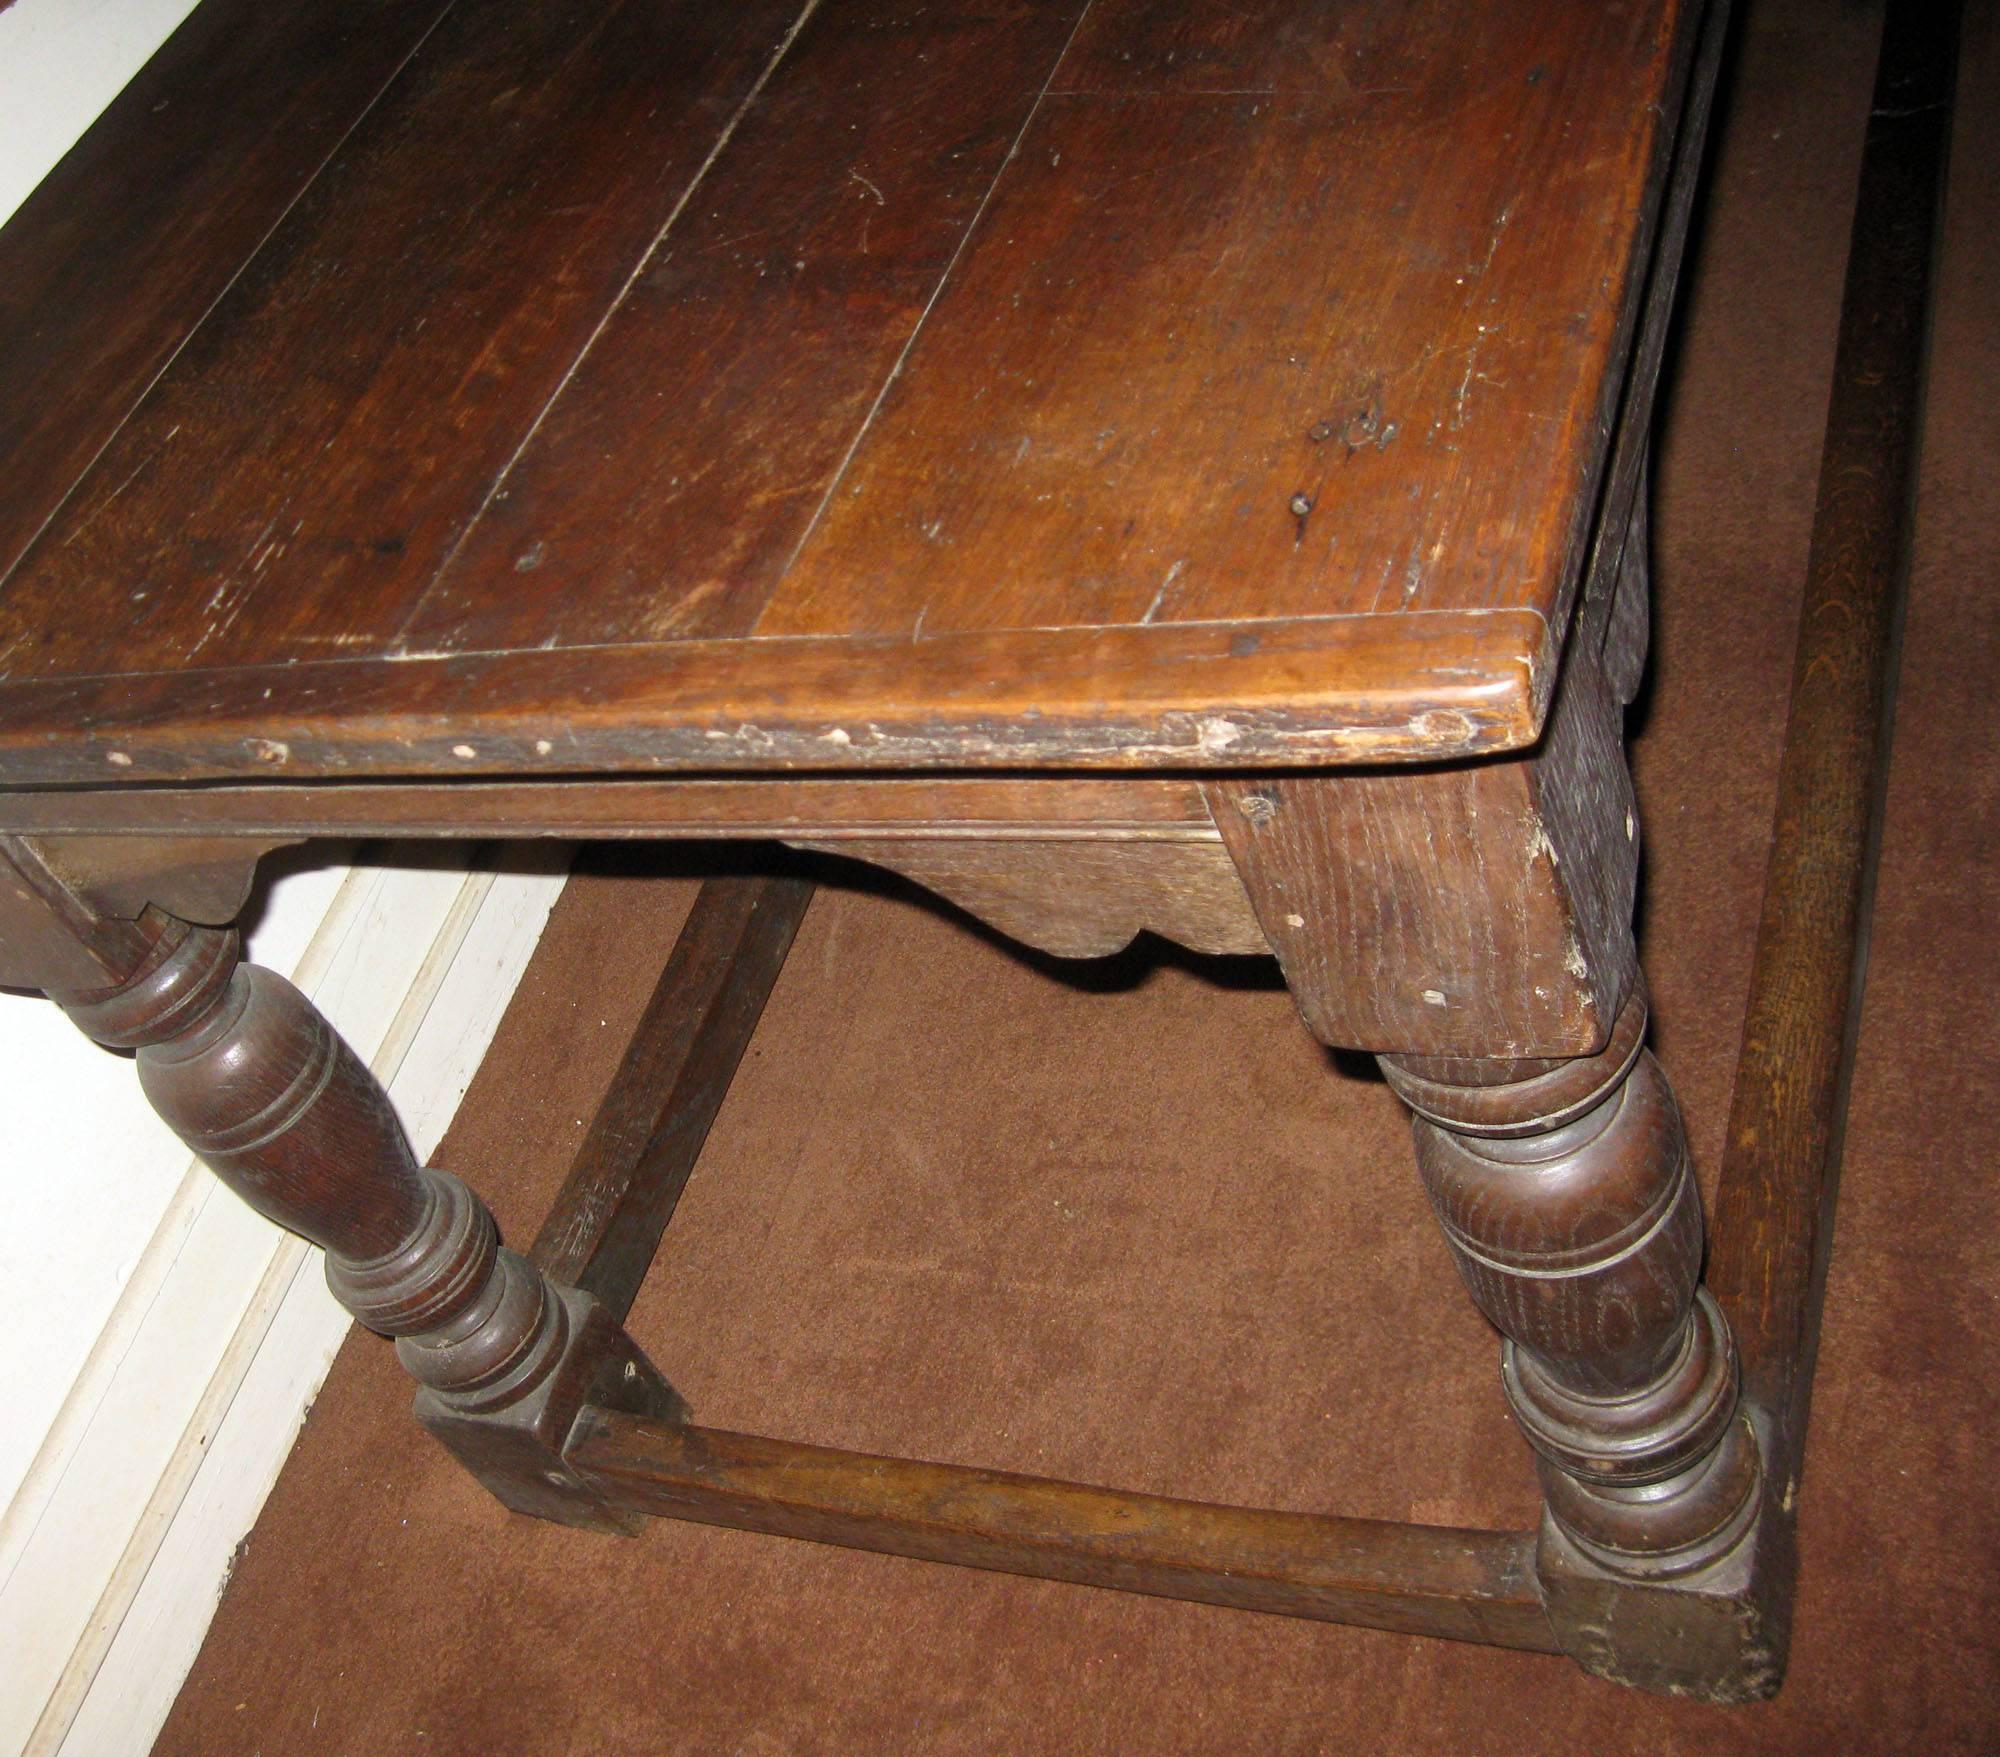 English oak refectory table with balustrade turned legs and stretcher base. Original finish with great patina. Maintains all the scratches, notches and wear of almost 350 years. See measurements below.